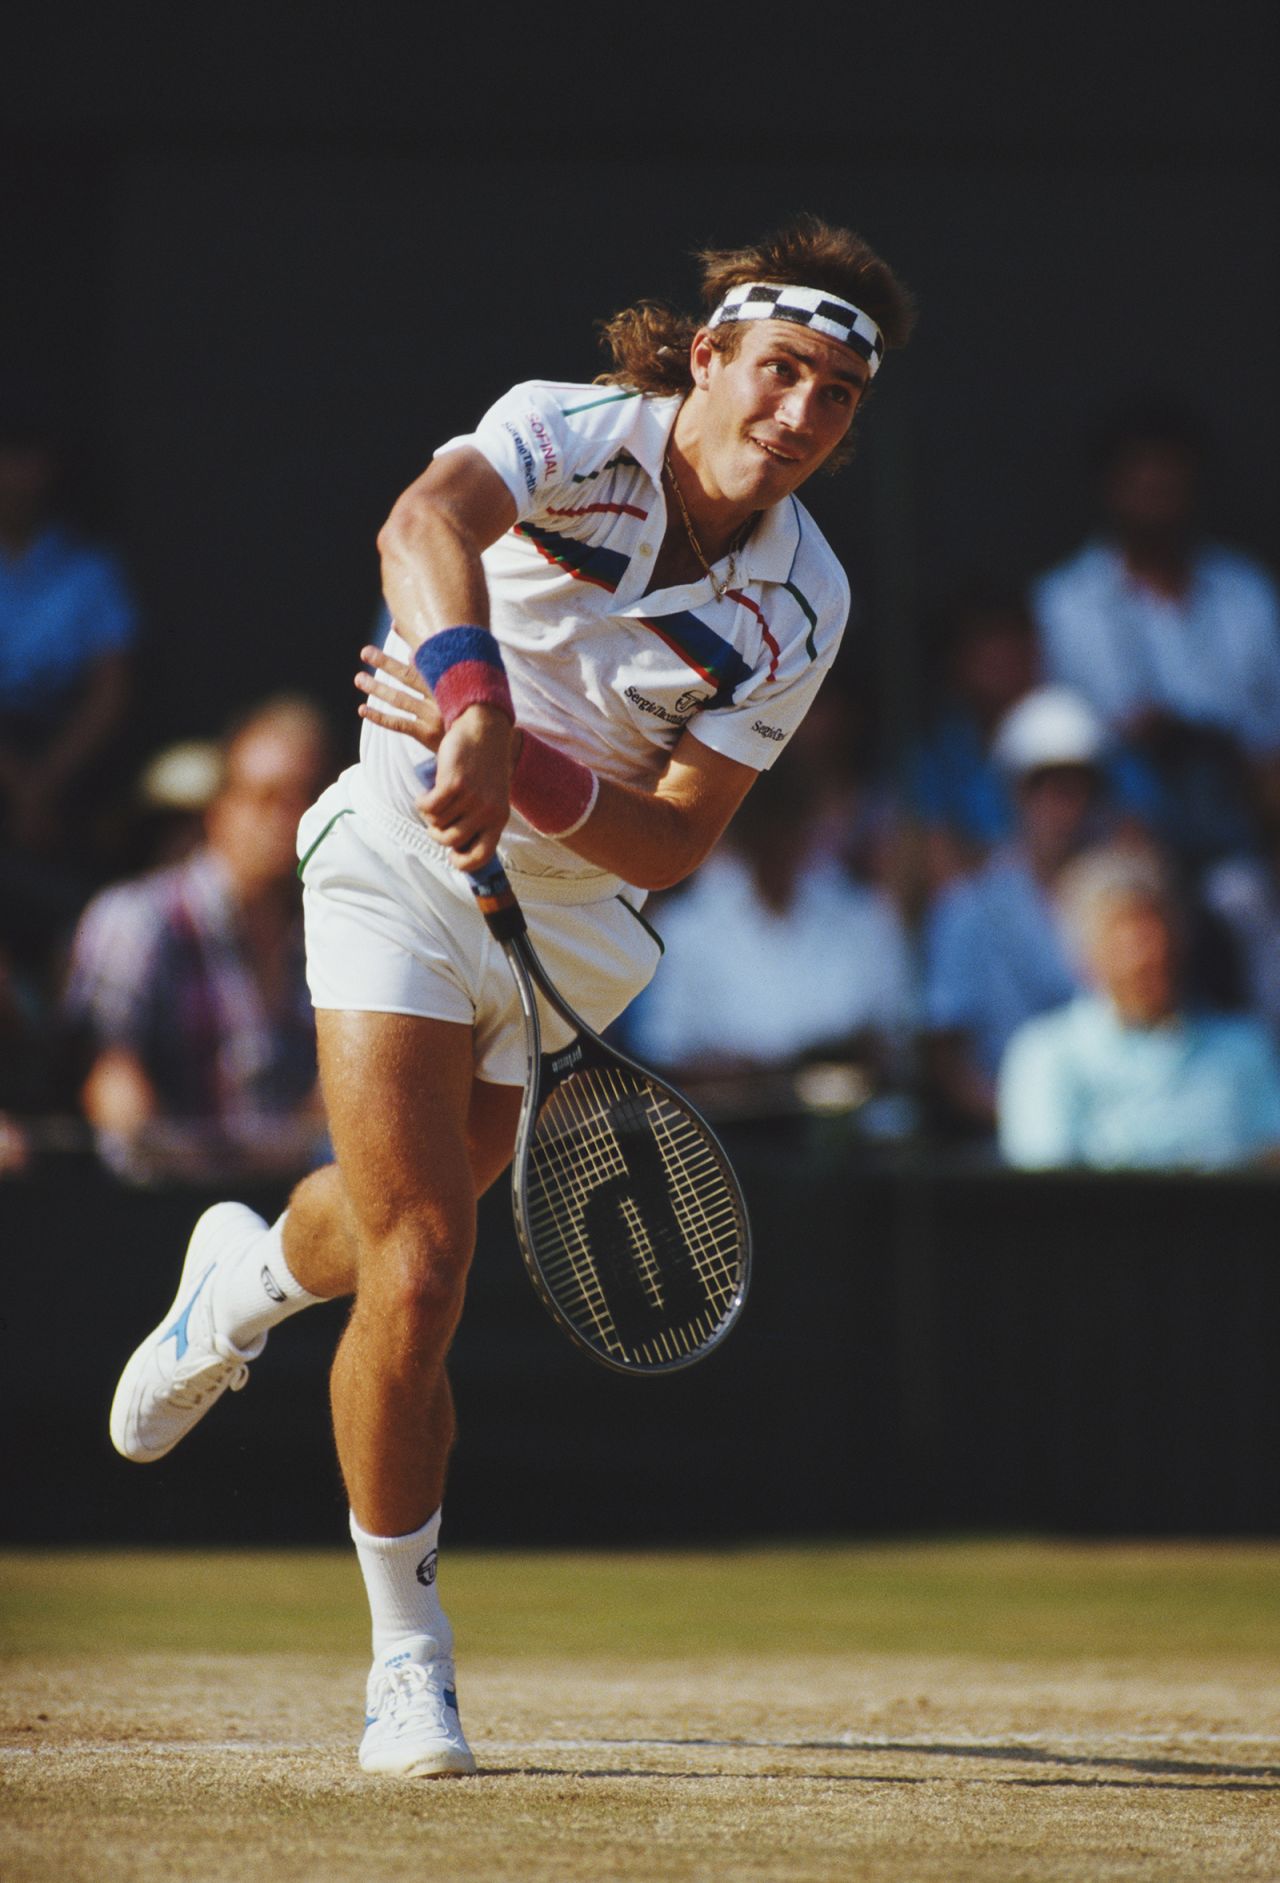 Pat Cash of Australia serves against Ivan Lendl during their Men's Singles Final match of the Wimbledon Lawn Tennis Championship on 5 July 1987 at the All England Lawn Tennis and Croquet Club in Wimbledon, London, England. (Photo by Chris Cole/Getty Images)